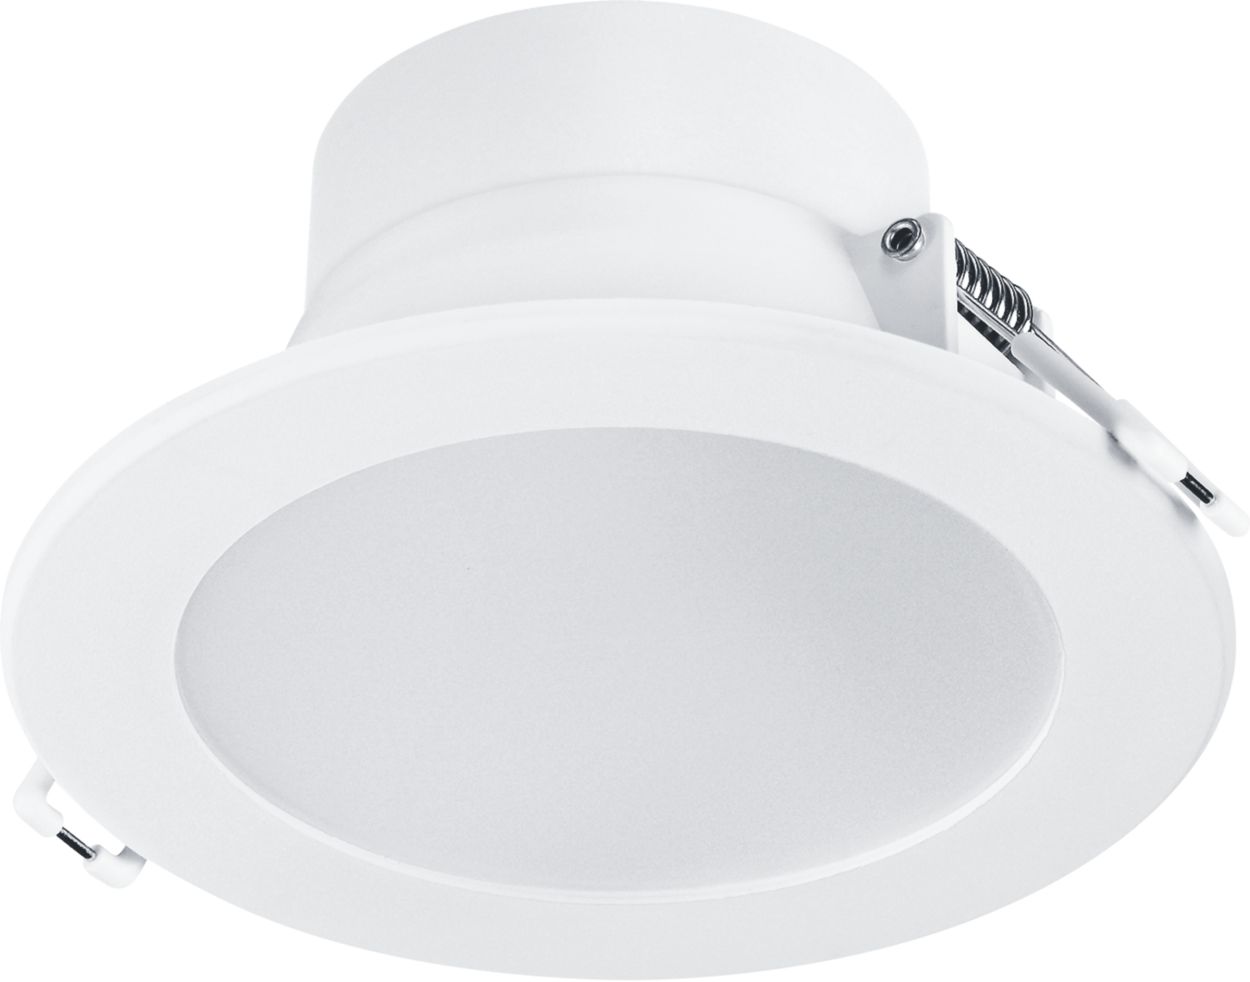 Less hassle, more savings. Tri-colour enabled downlight.